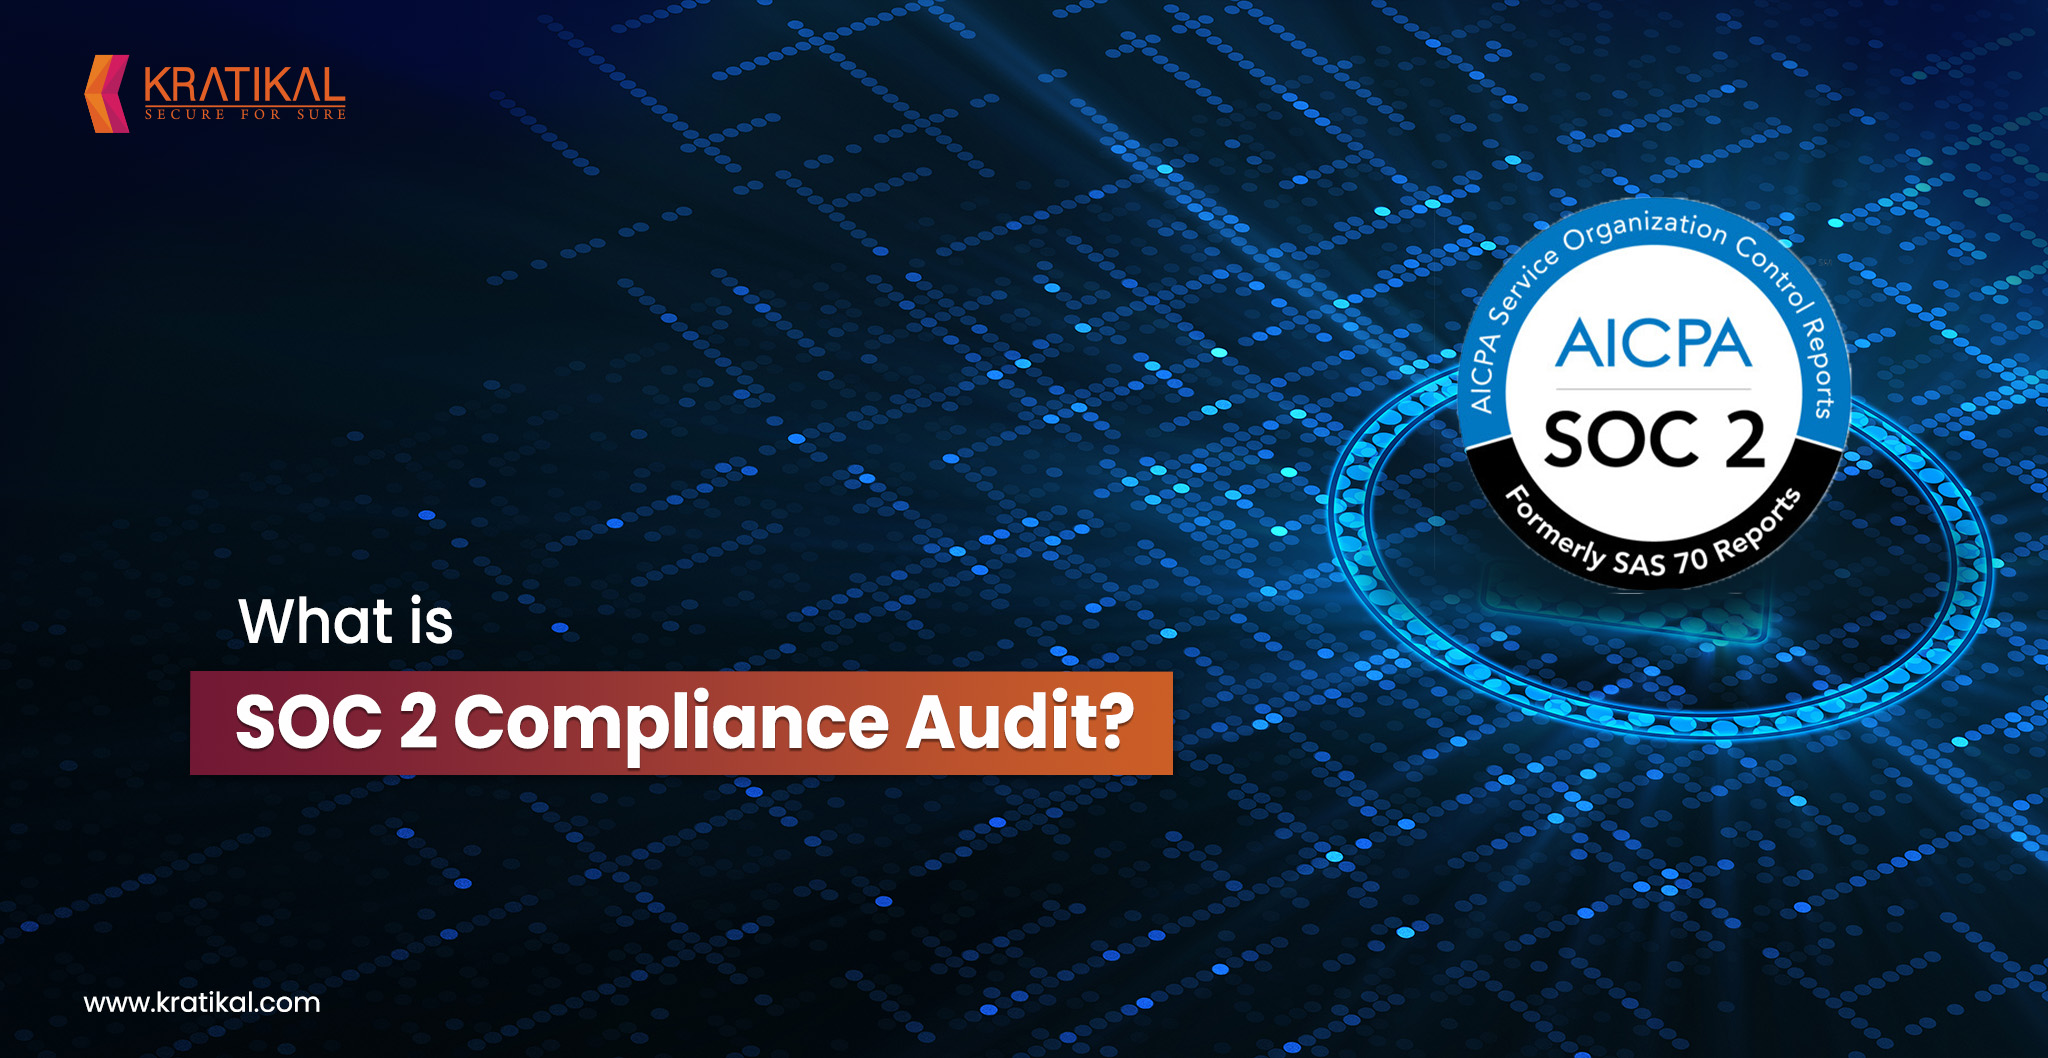 What is SOC 2 Compliance Audit?